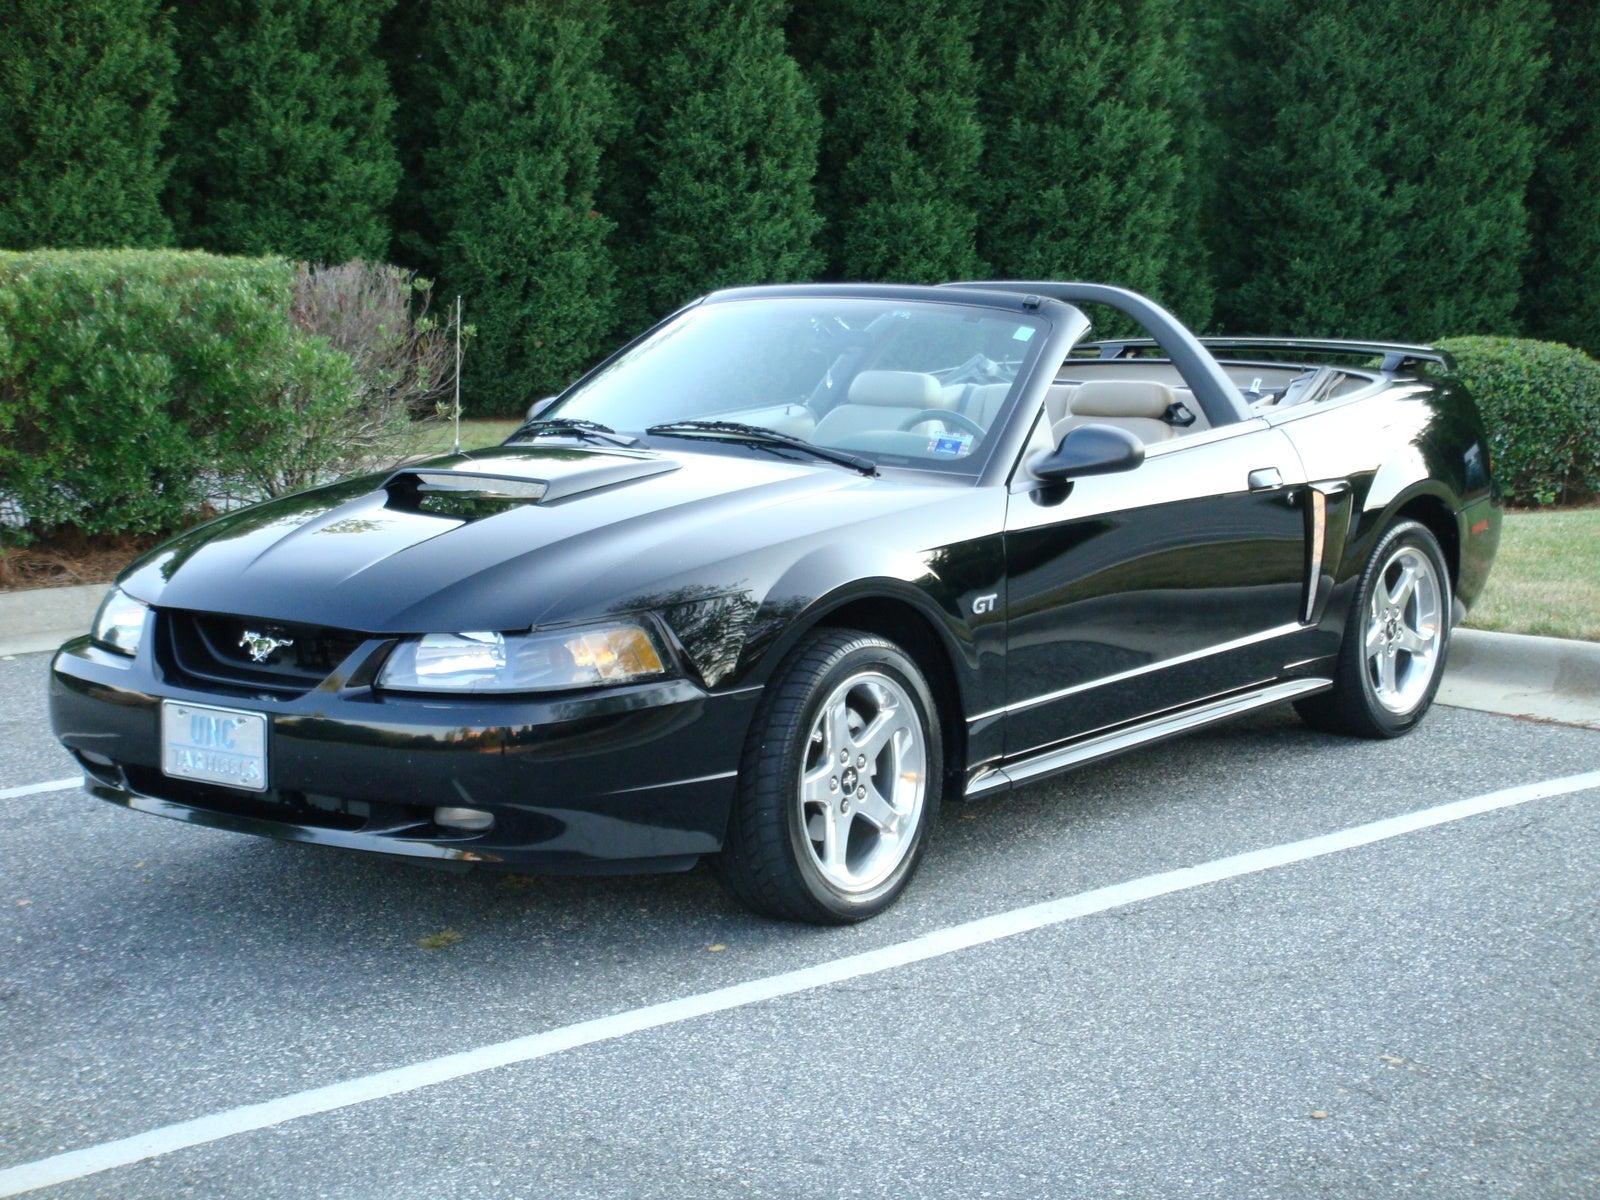 2003 Ford gt mustang specs